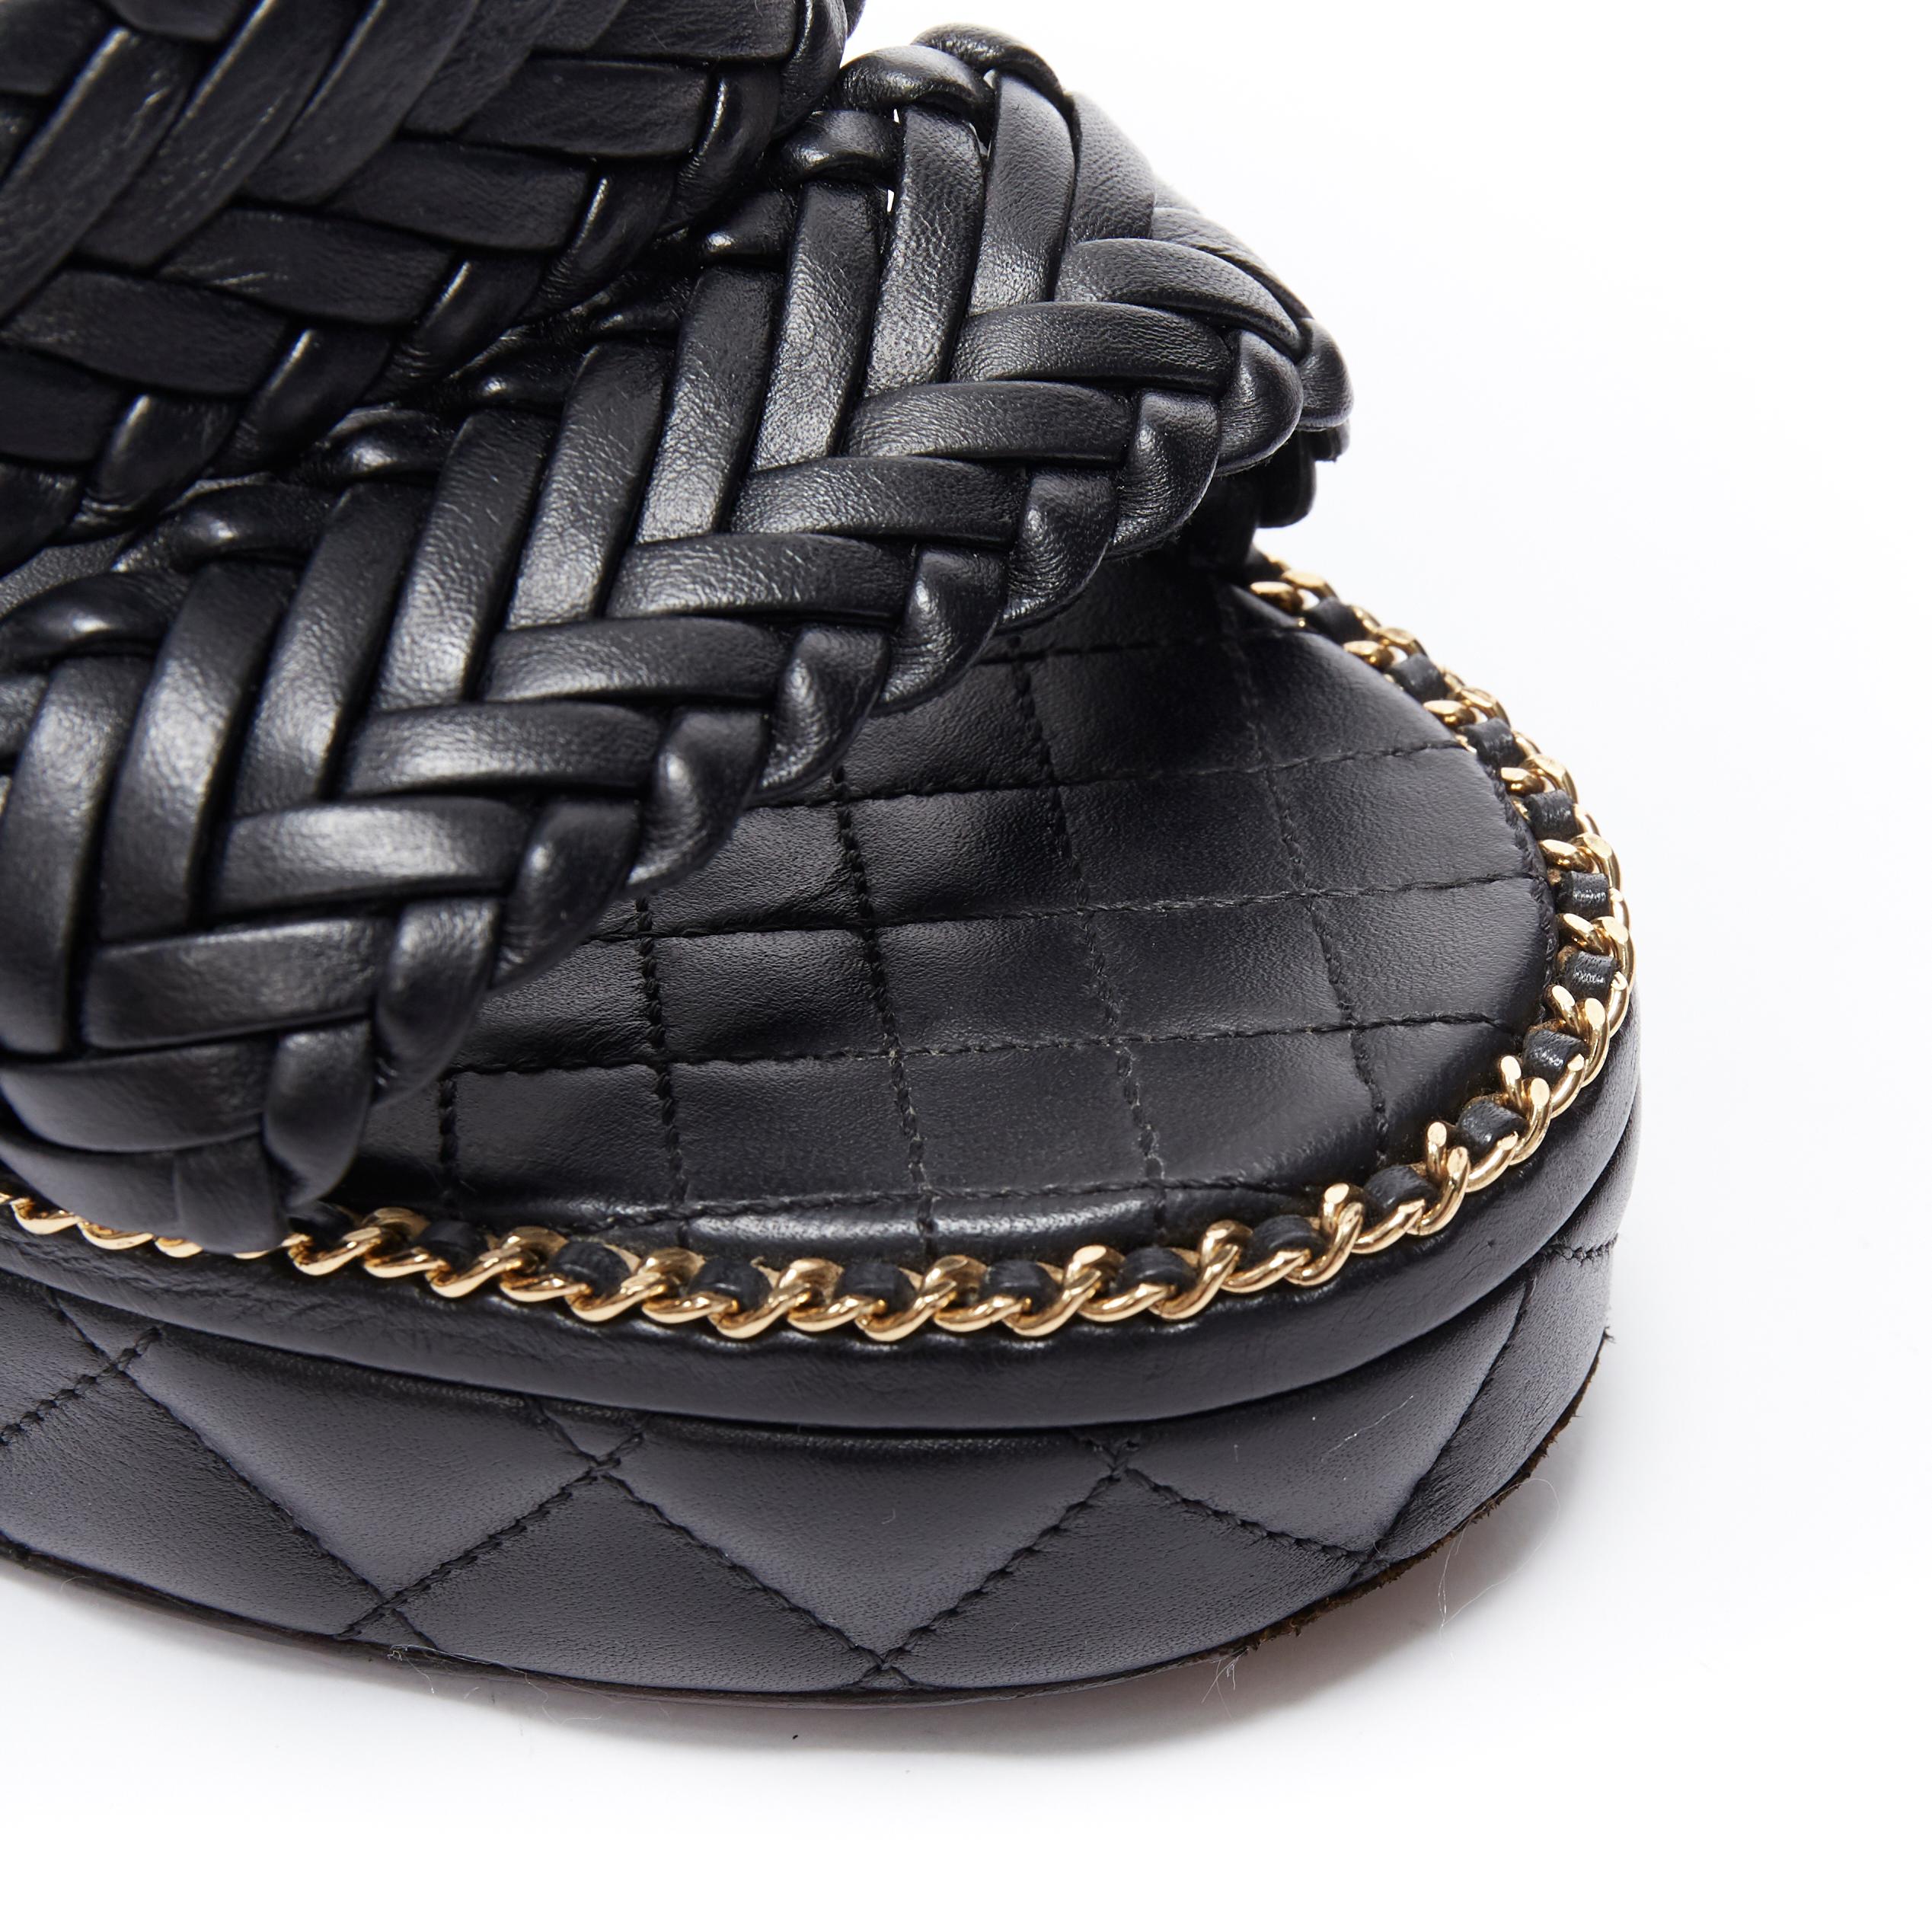 Women's CHANEL SS15 black braided leather 2.55 chain diamond quilted wedge sandal EU39